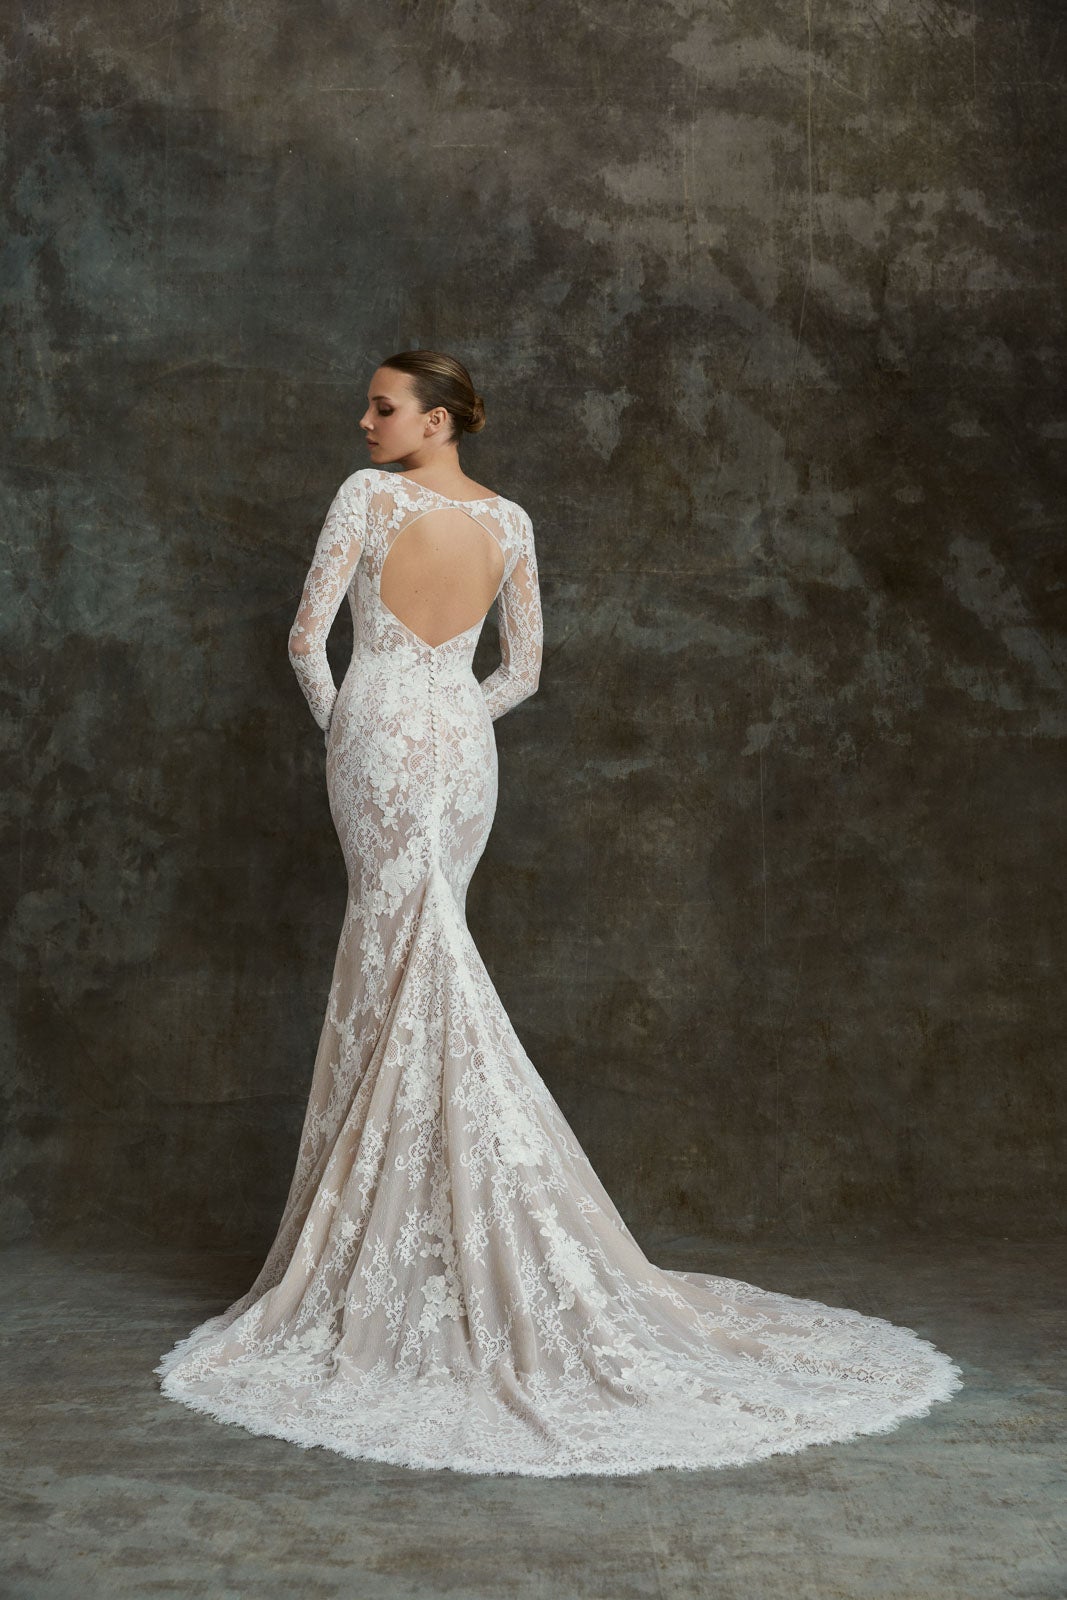 Lace Romantic Long Sleeve Gown by Alberto Palatchi - Image 3